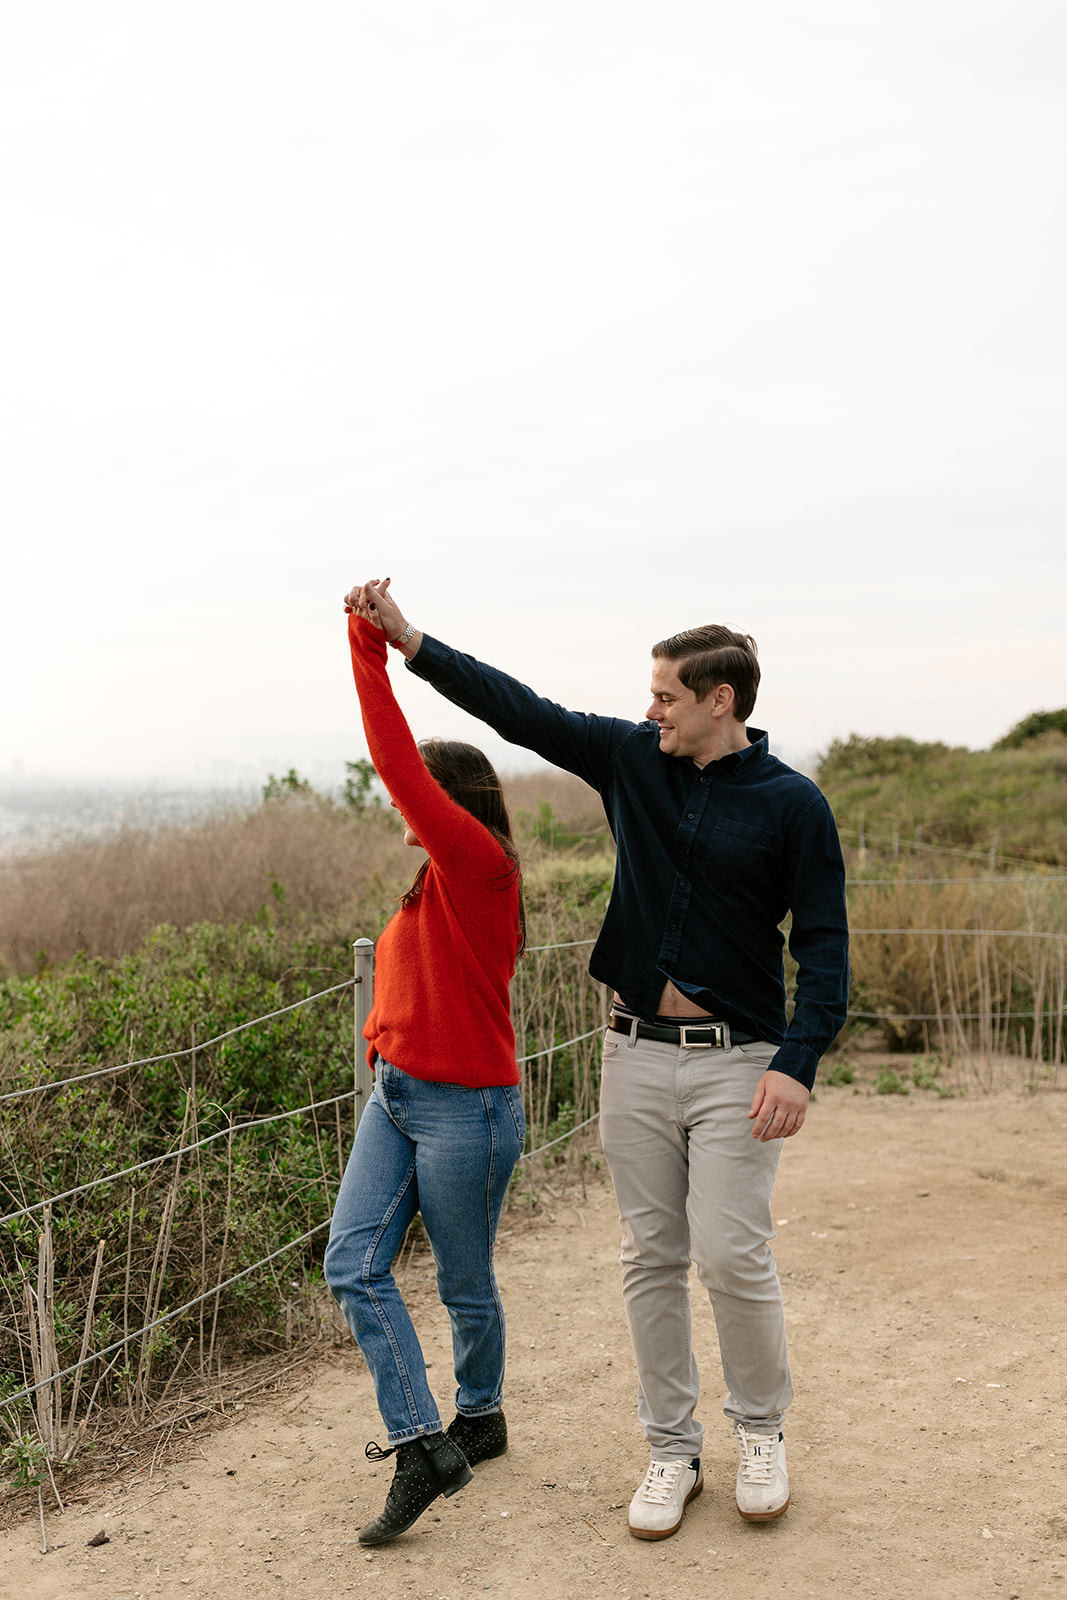 southern california socal baldwin hills park engagement photoshoot outfit inspo inspiration couples photoshoot couples